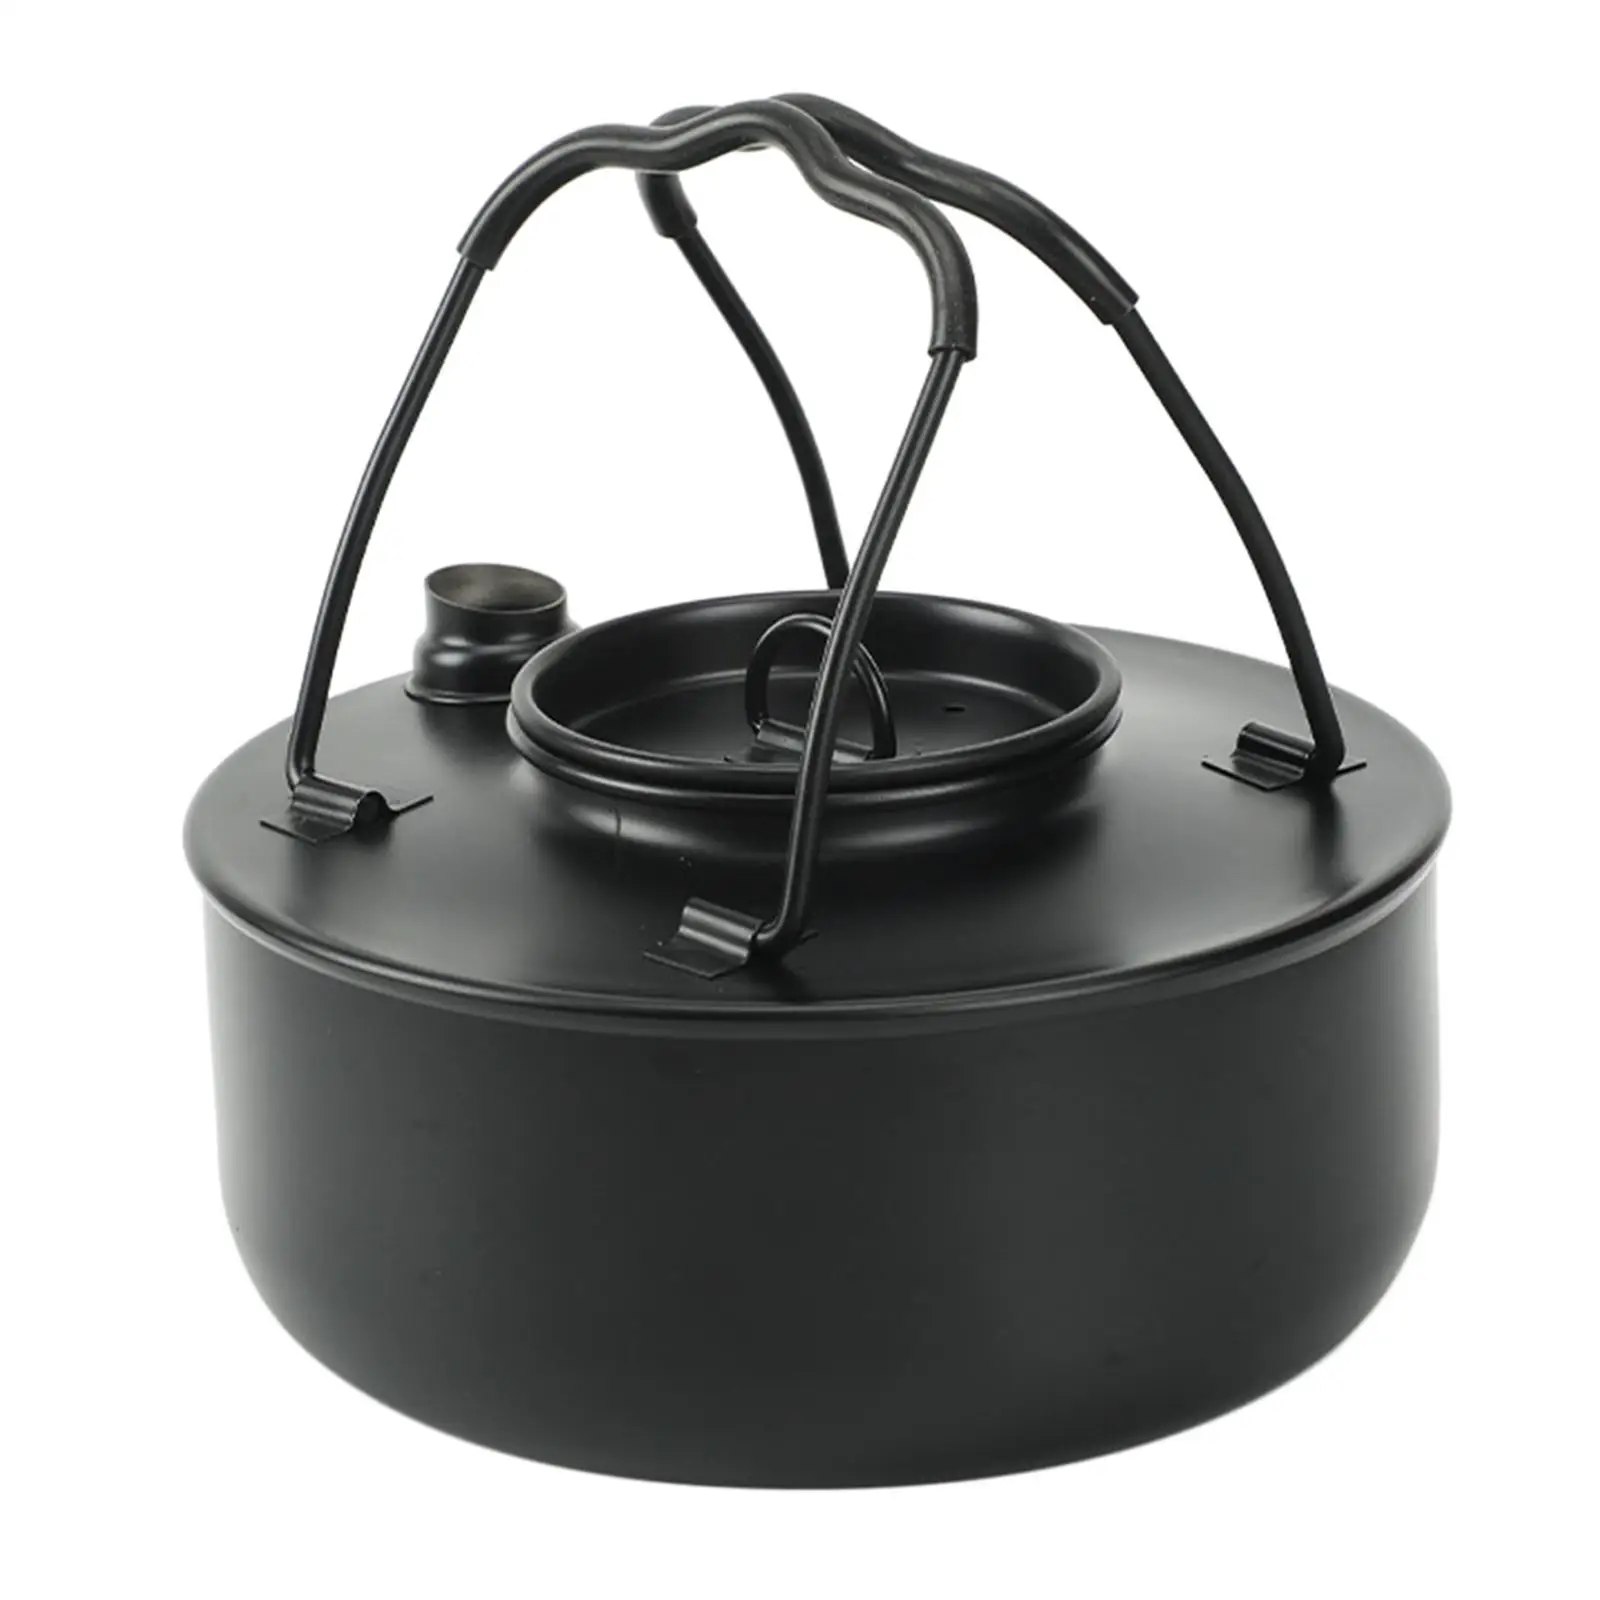 Outdoor Stove Pot Teapot Anti Scald Handle Camp Camping Kettle for Open Fire